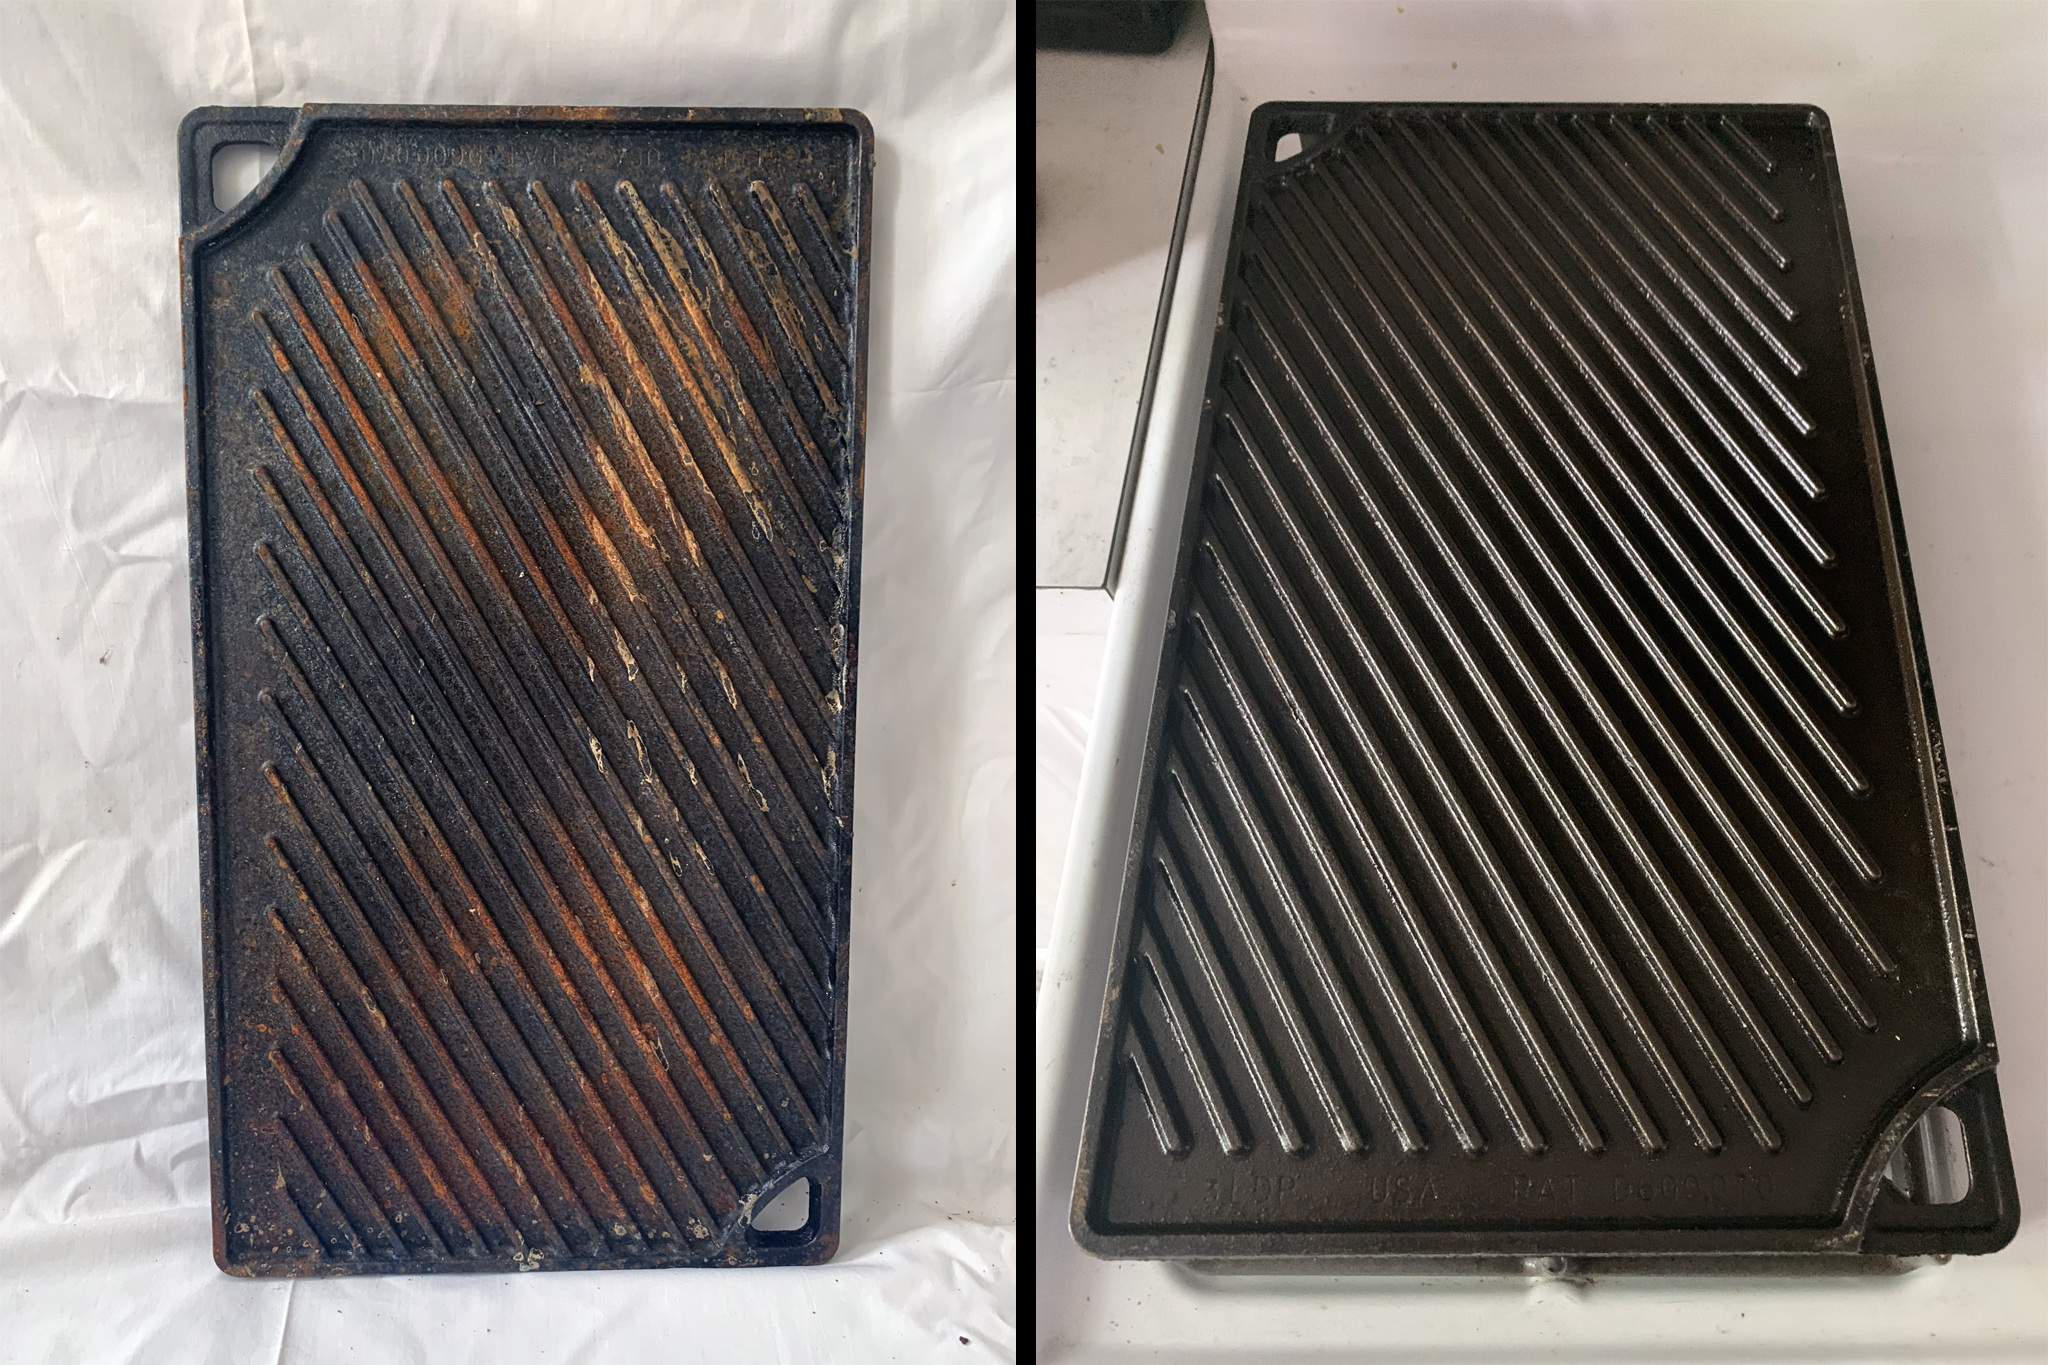 The Best Way to Clean a Cast-Iron Grill Pan